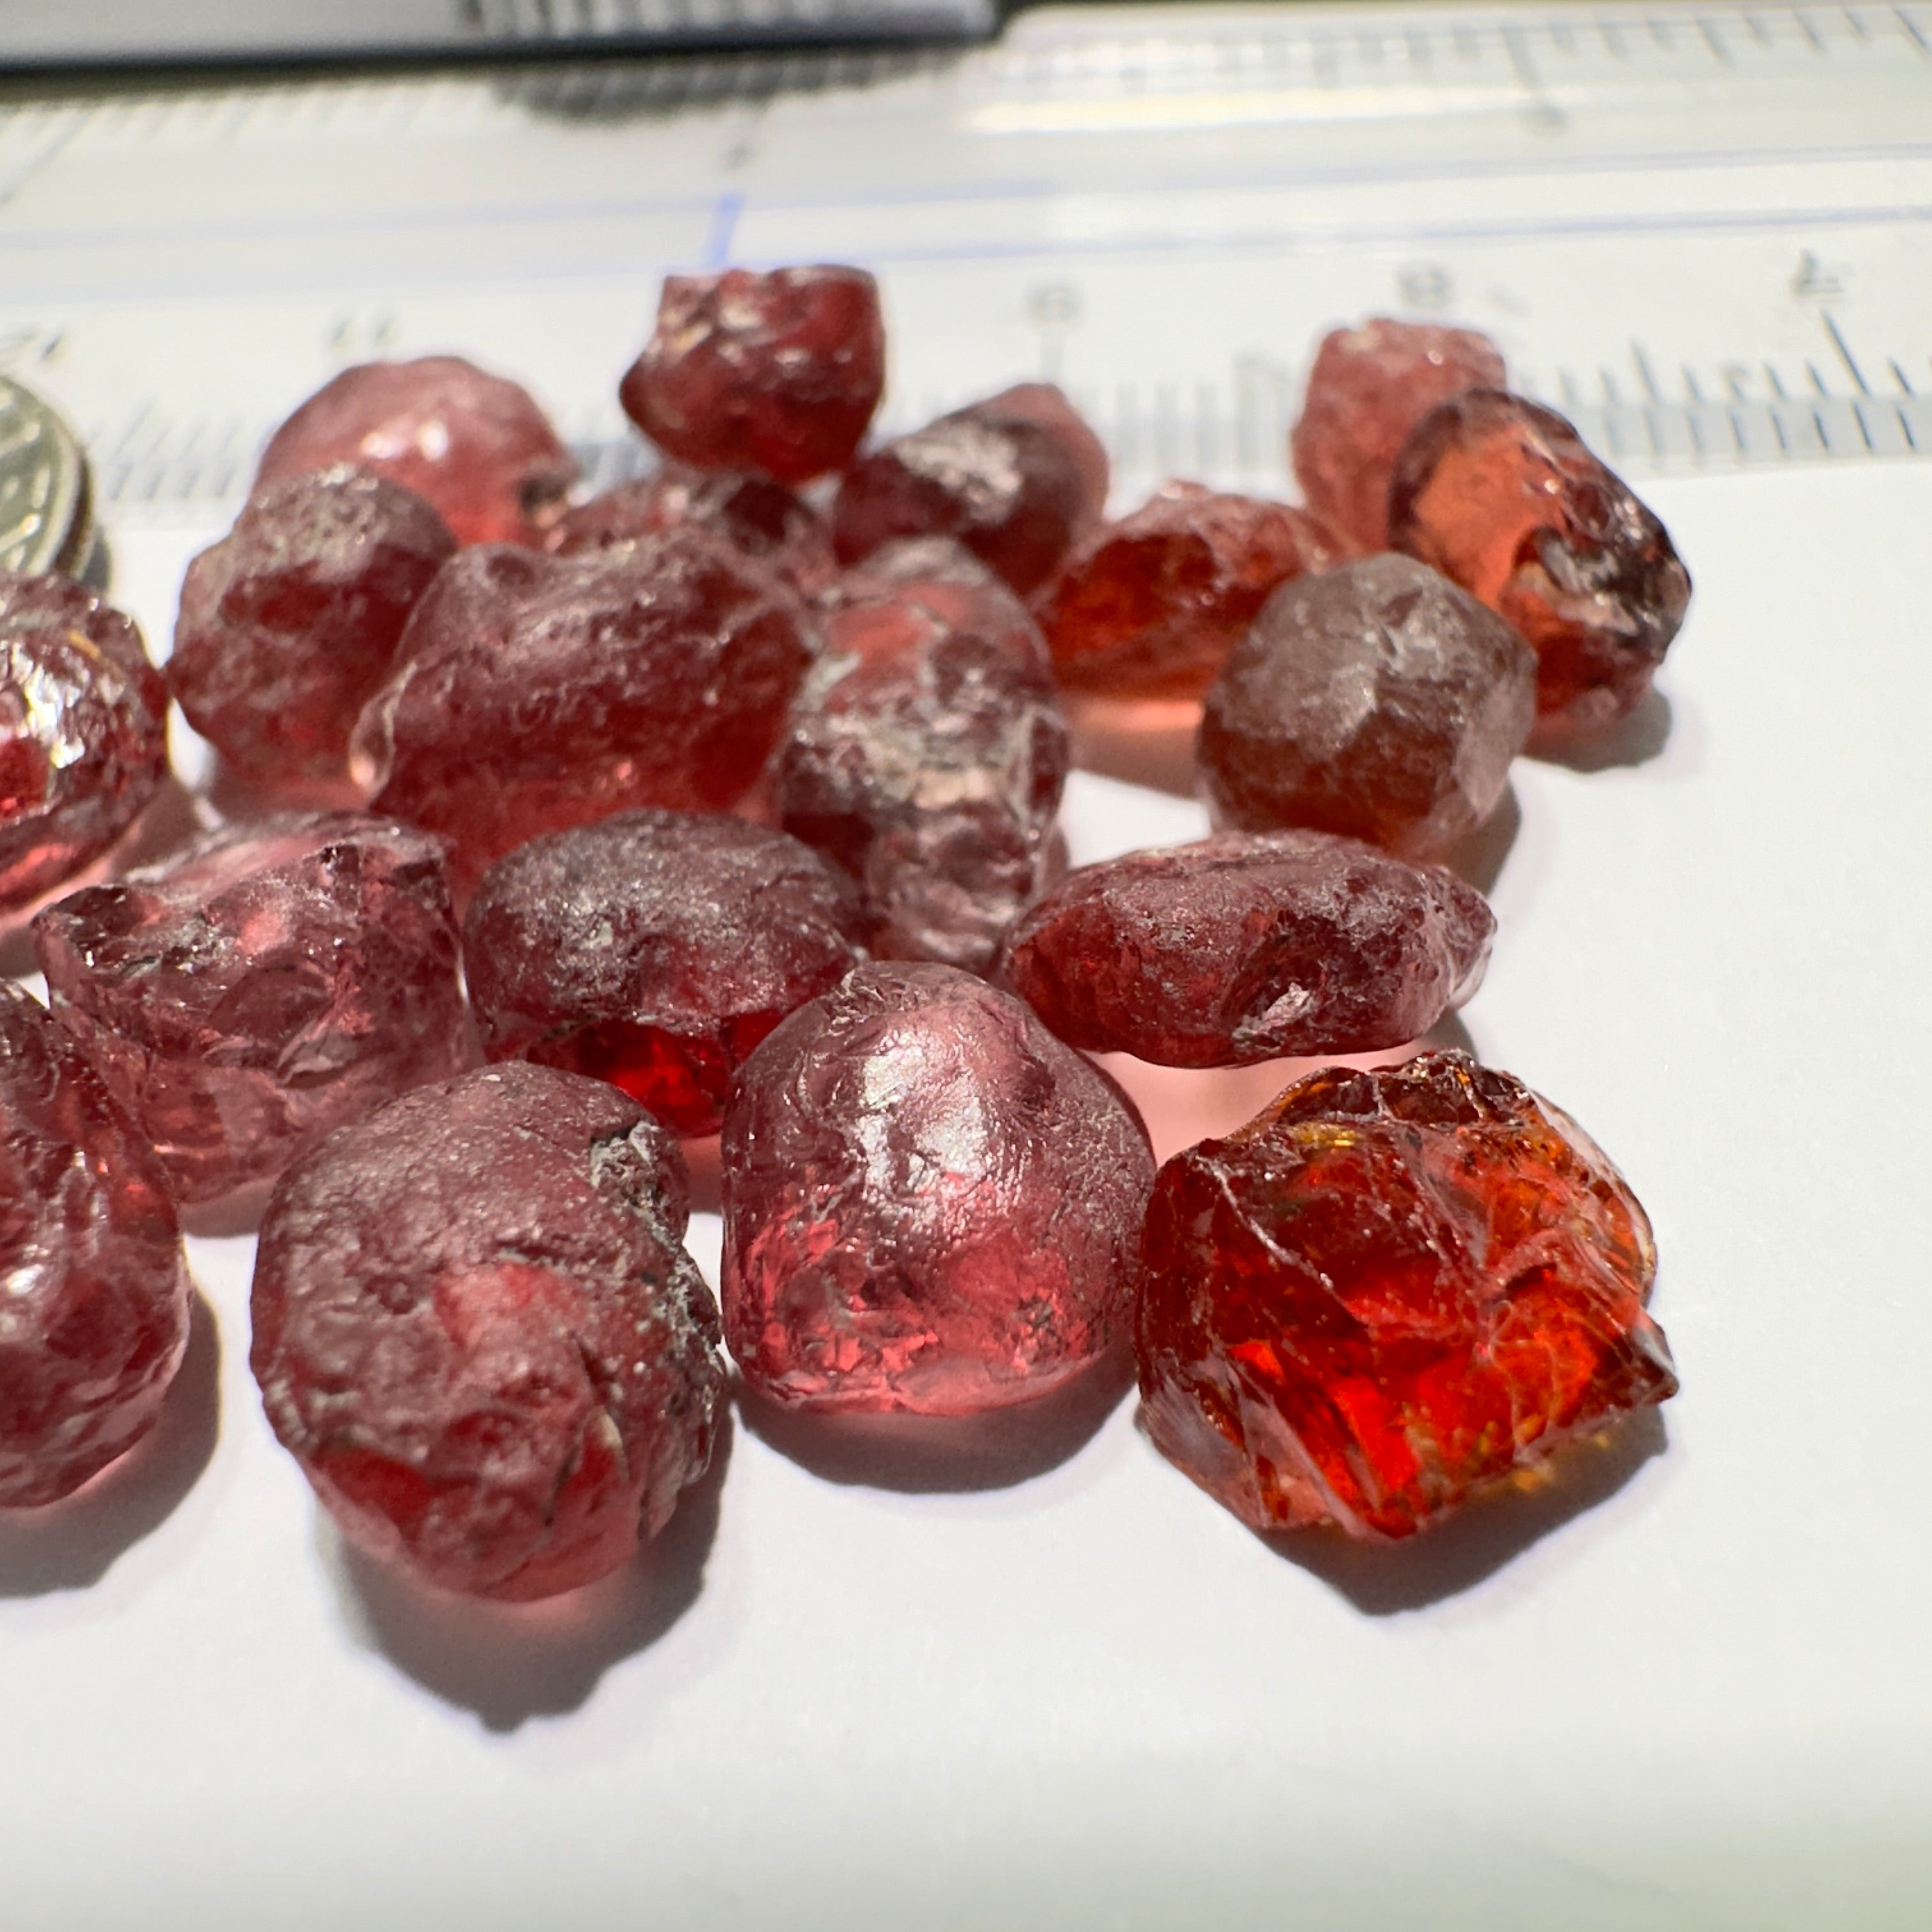 52.37ct Champagne Garnet Lot, Tanzania. 1.37ct-4.26ct. Included, Untreated Unheated